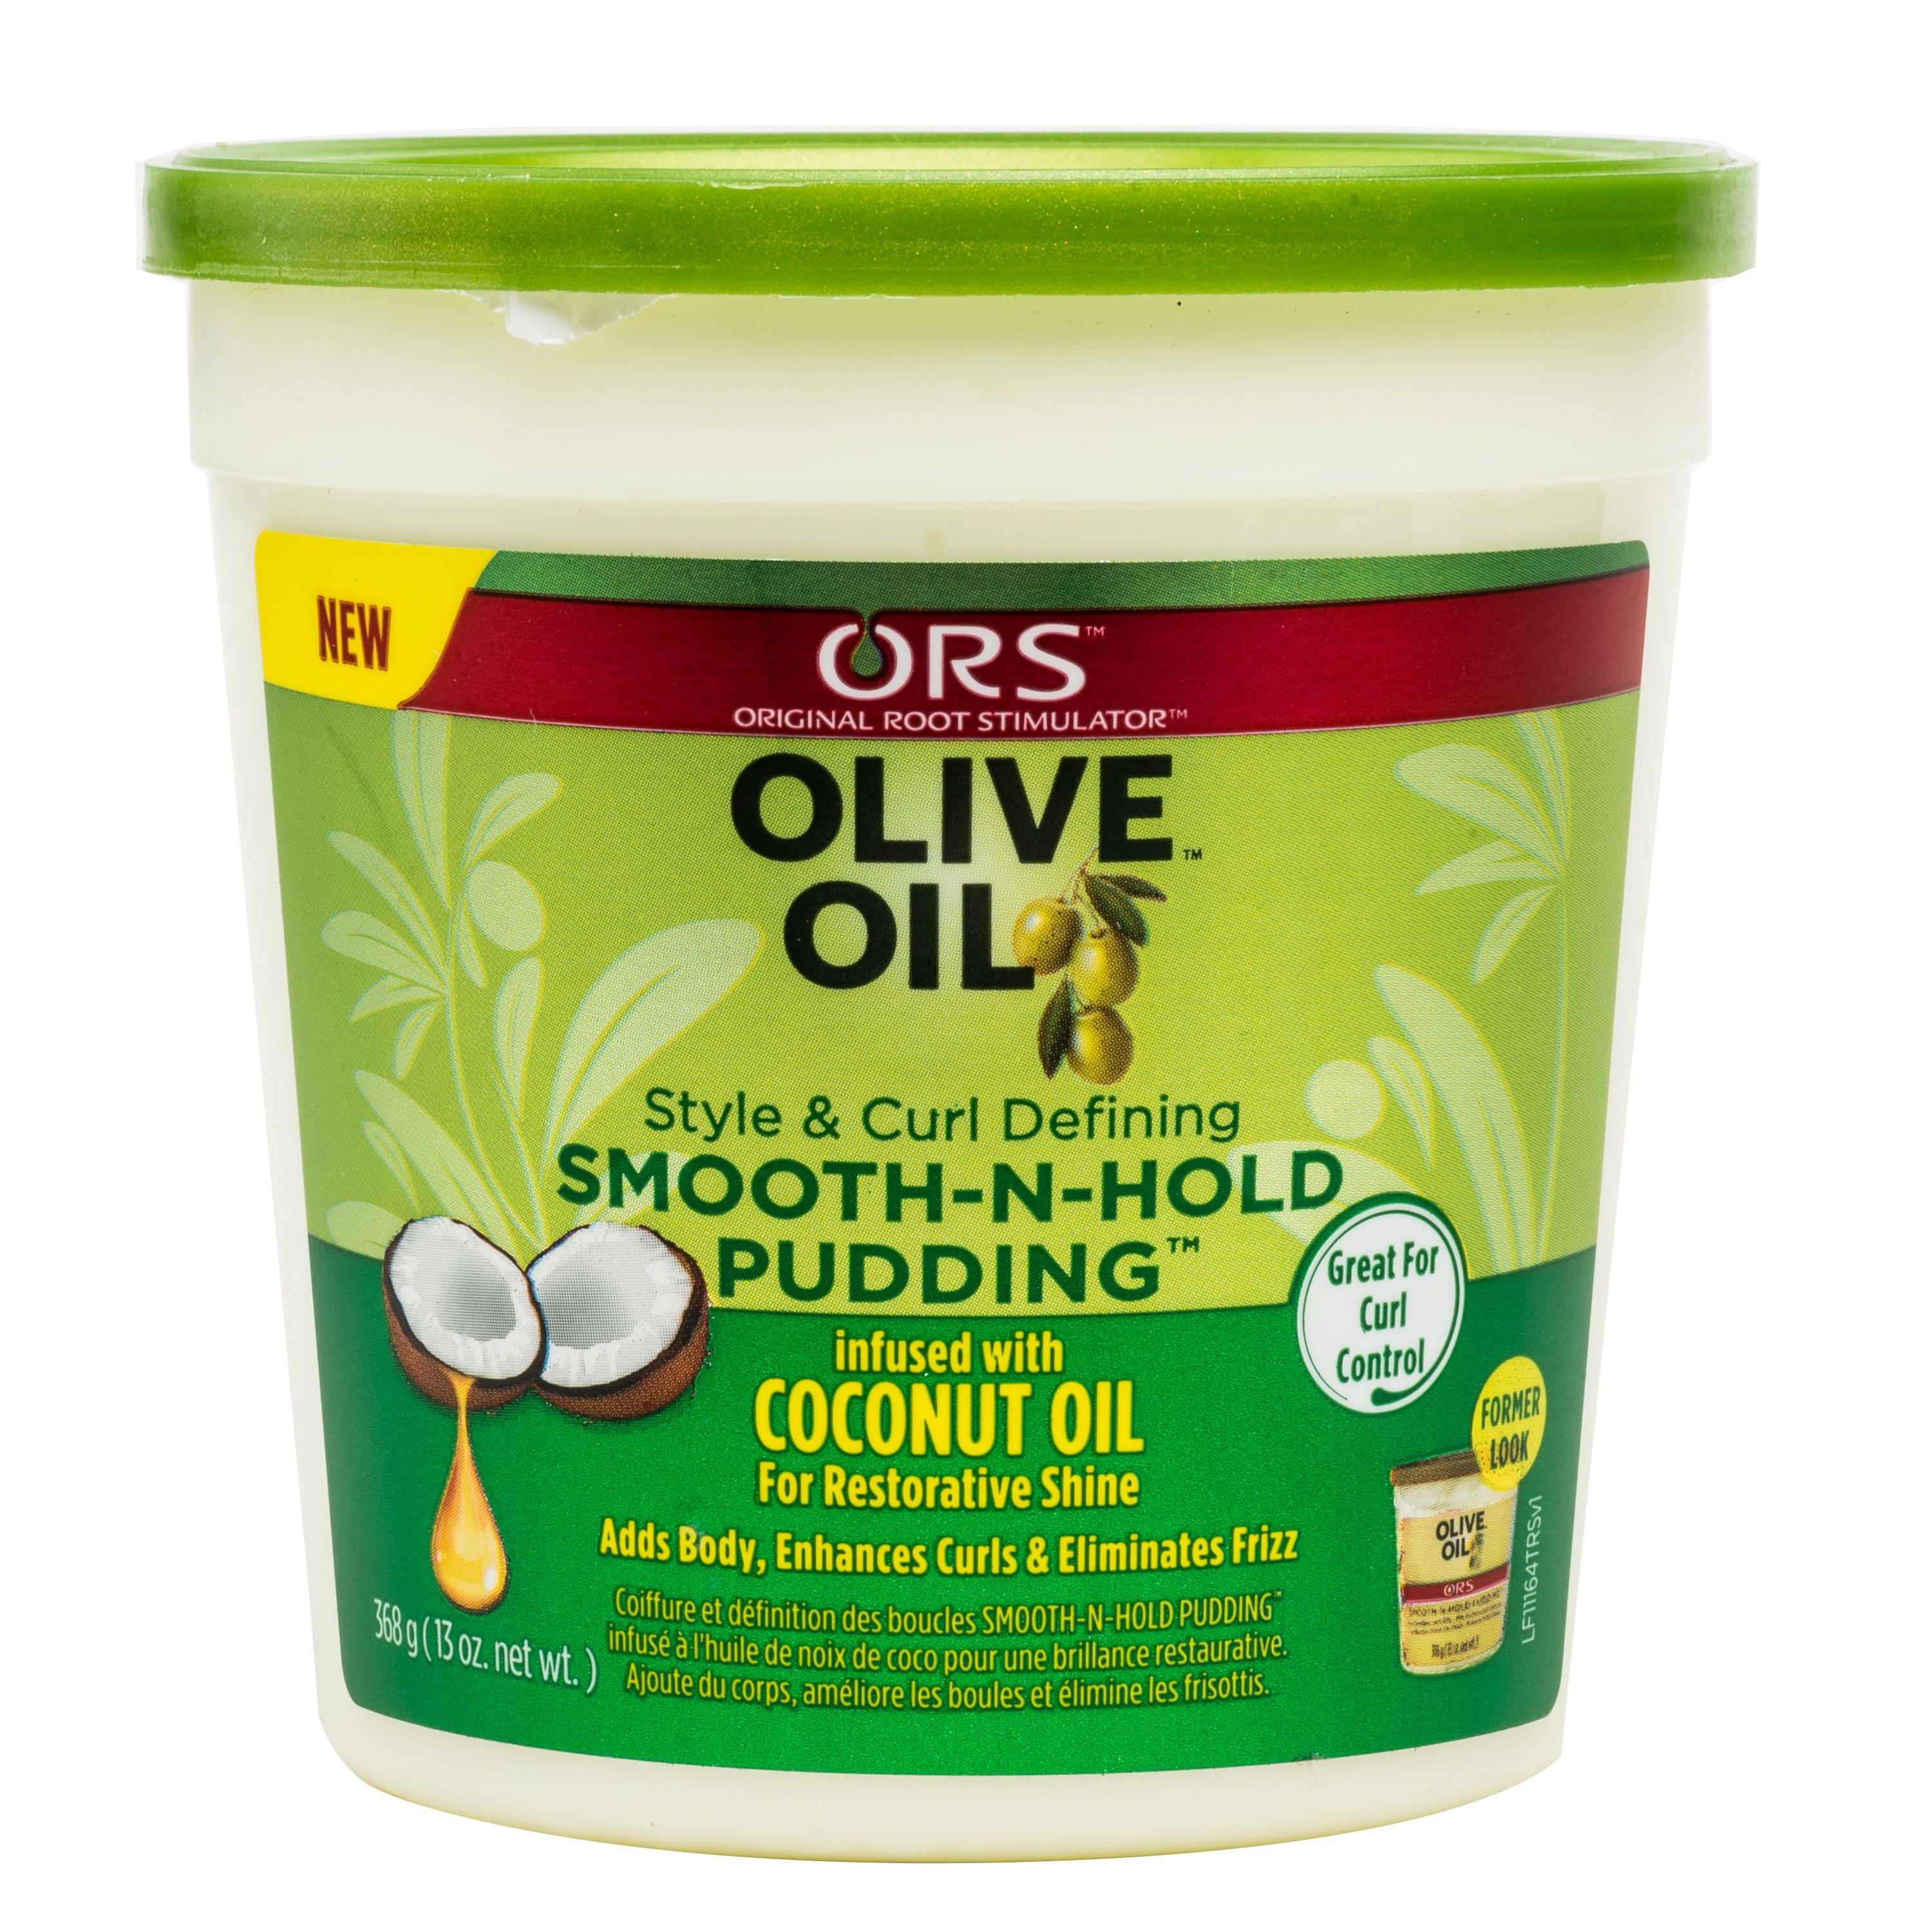 ORS Olive Oil Smooth-N-Hold Pudding with Coconut Oil for Restorative Shine, Style & Curl, 13 oz